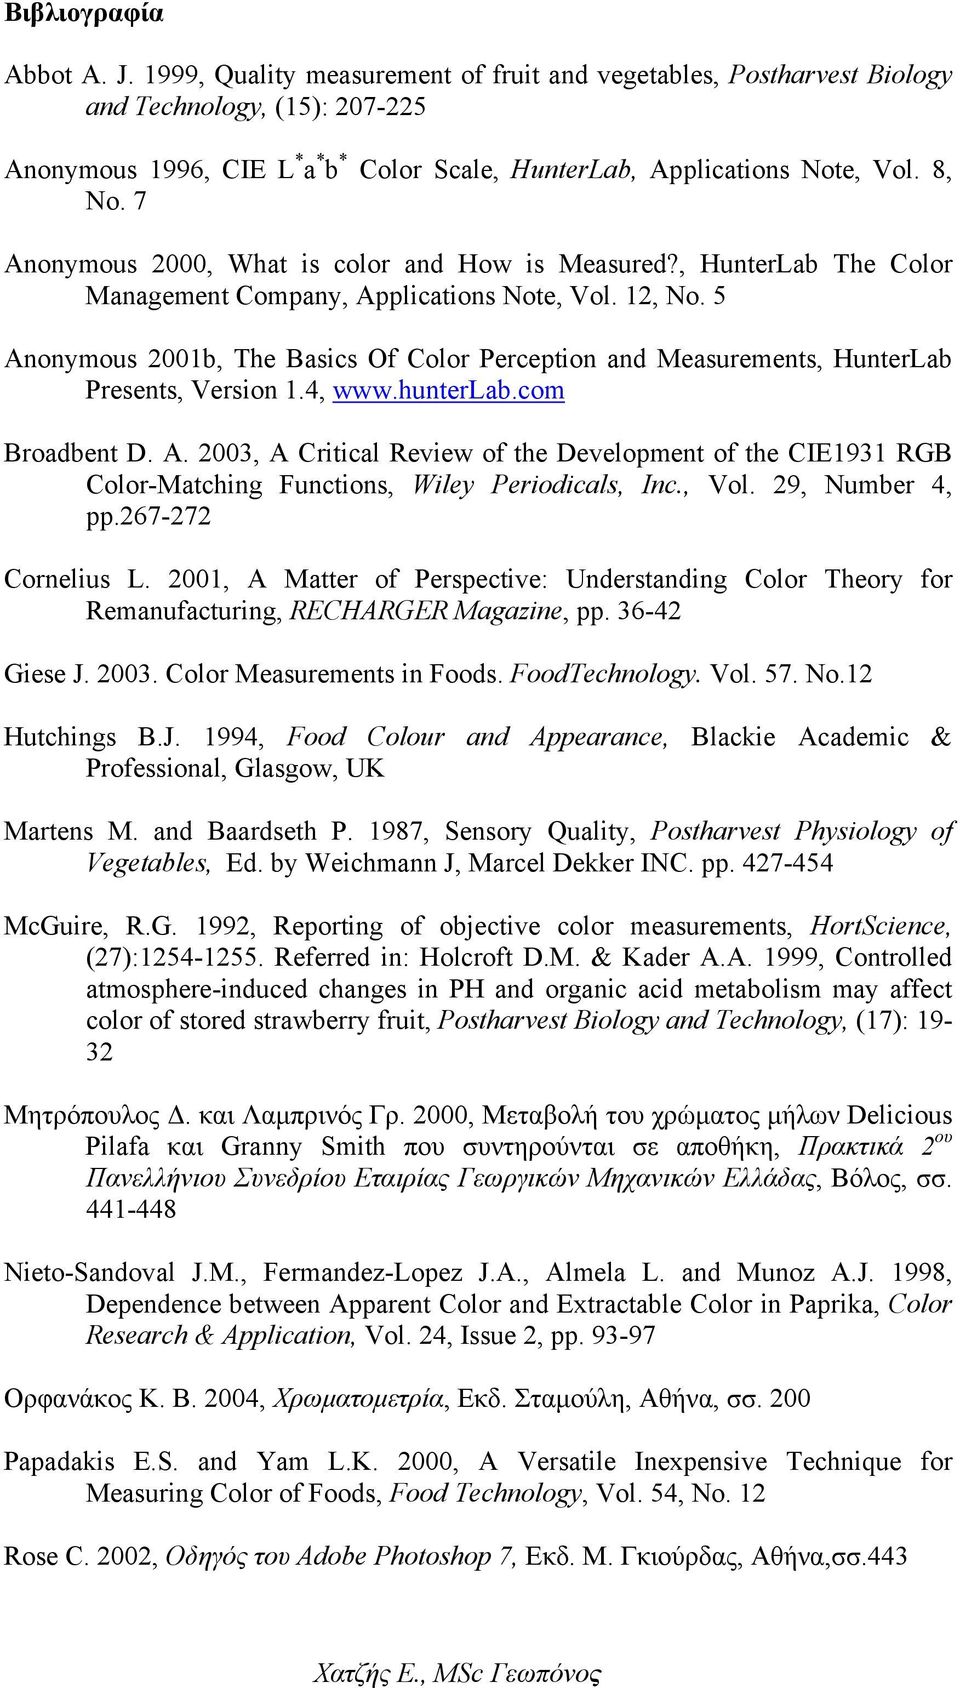 5 Anonymous 2001b, The Basics Of Color Perception and Measurements, HunterLab Presents, Version 1.4, www.hunterlab.com Broadbent D. A. 2003, A Critical Review of the Development of the CIE1931 RGB Color-Matching Functions, Wiley Periodicals, Inc.